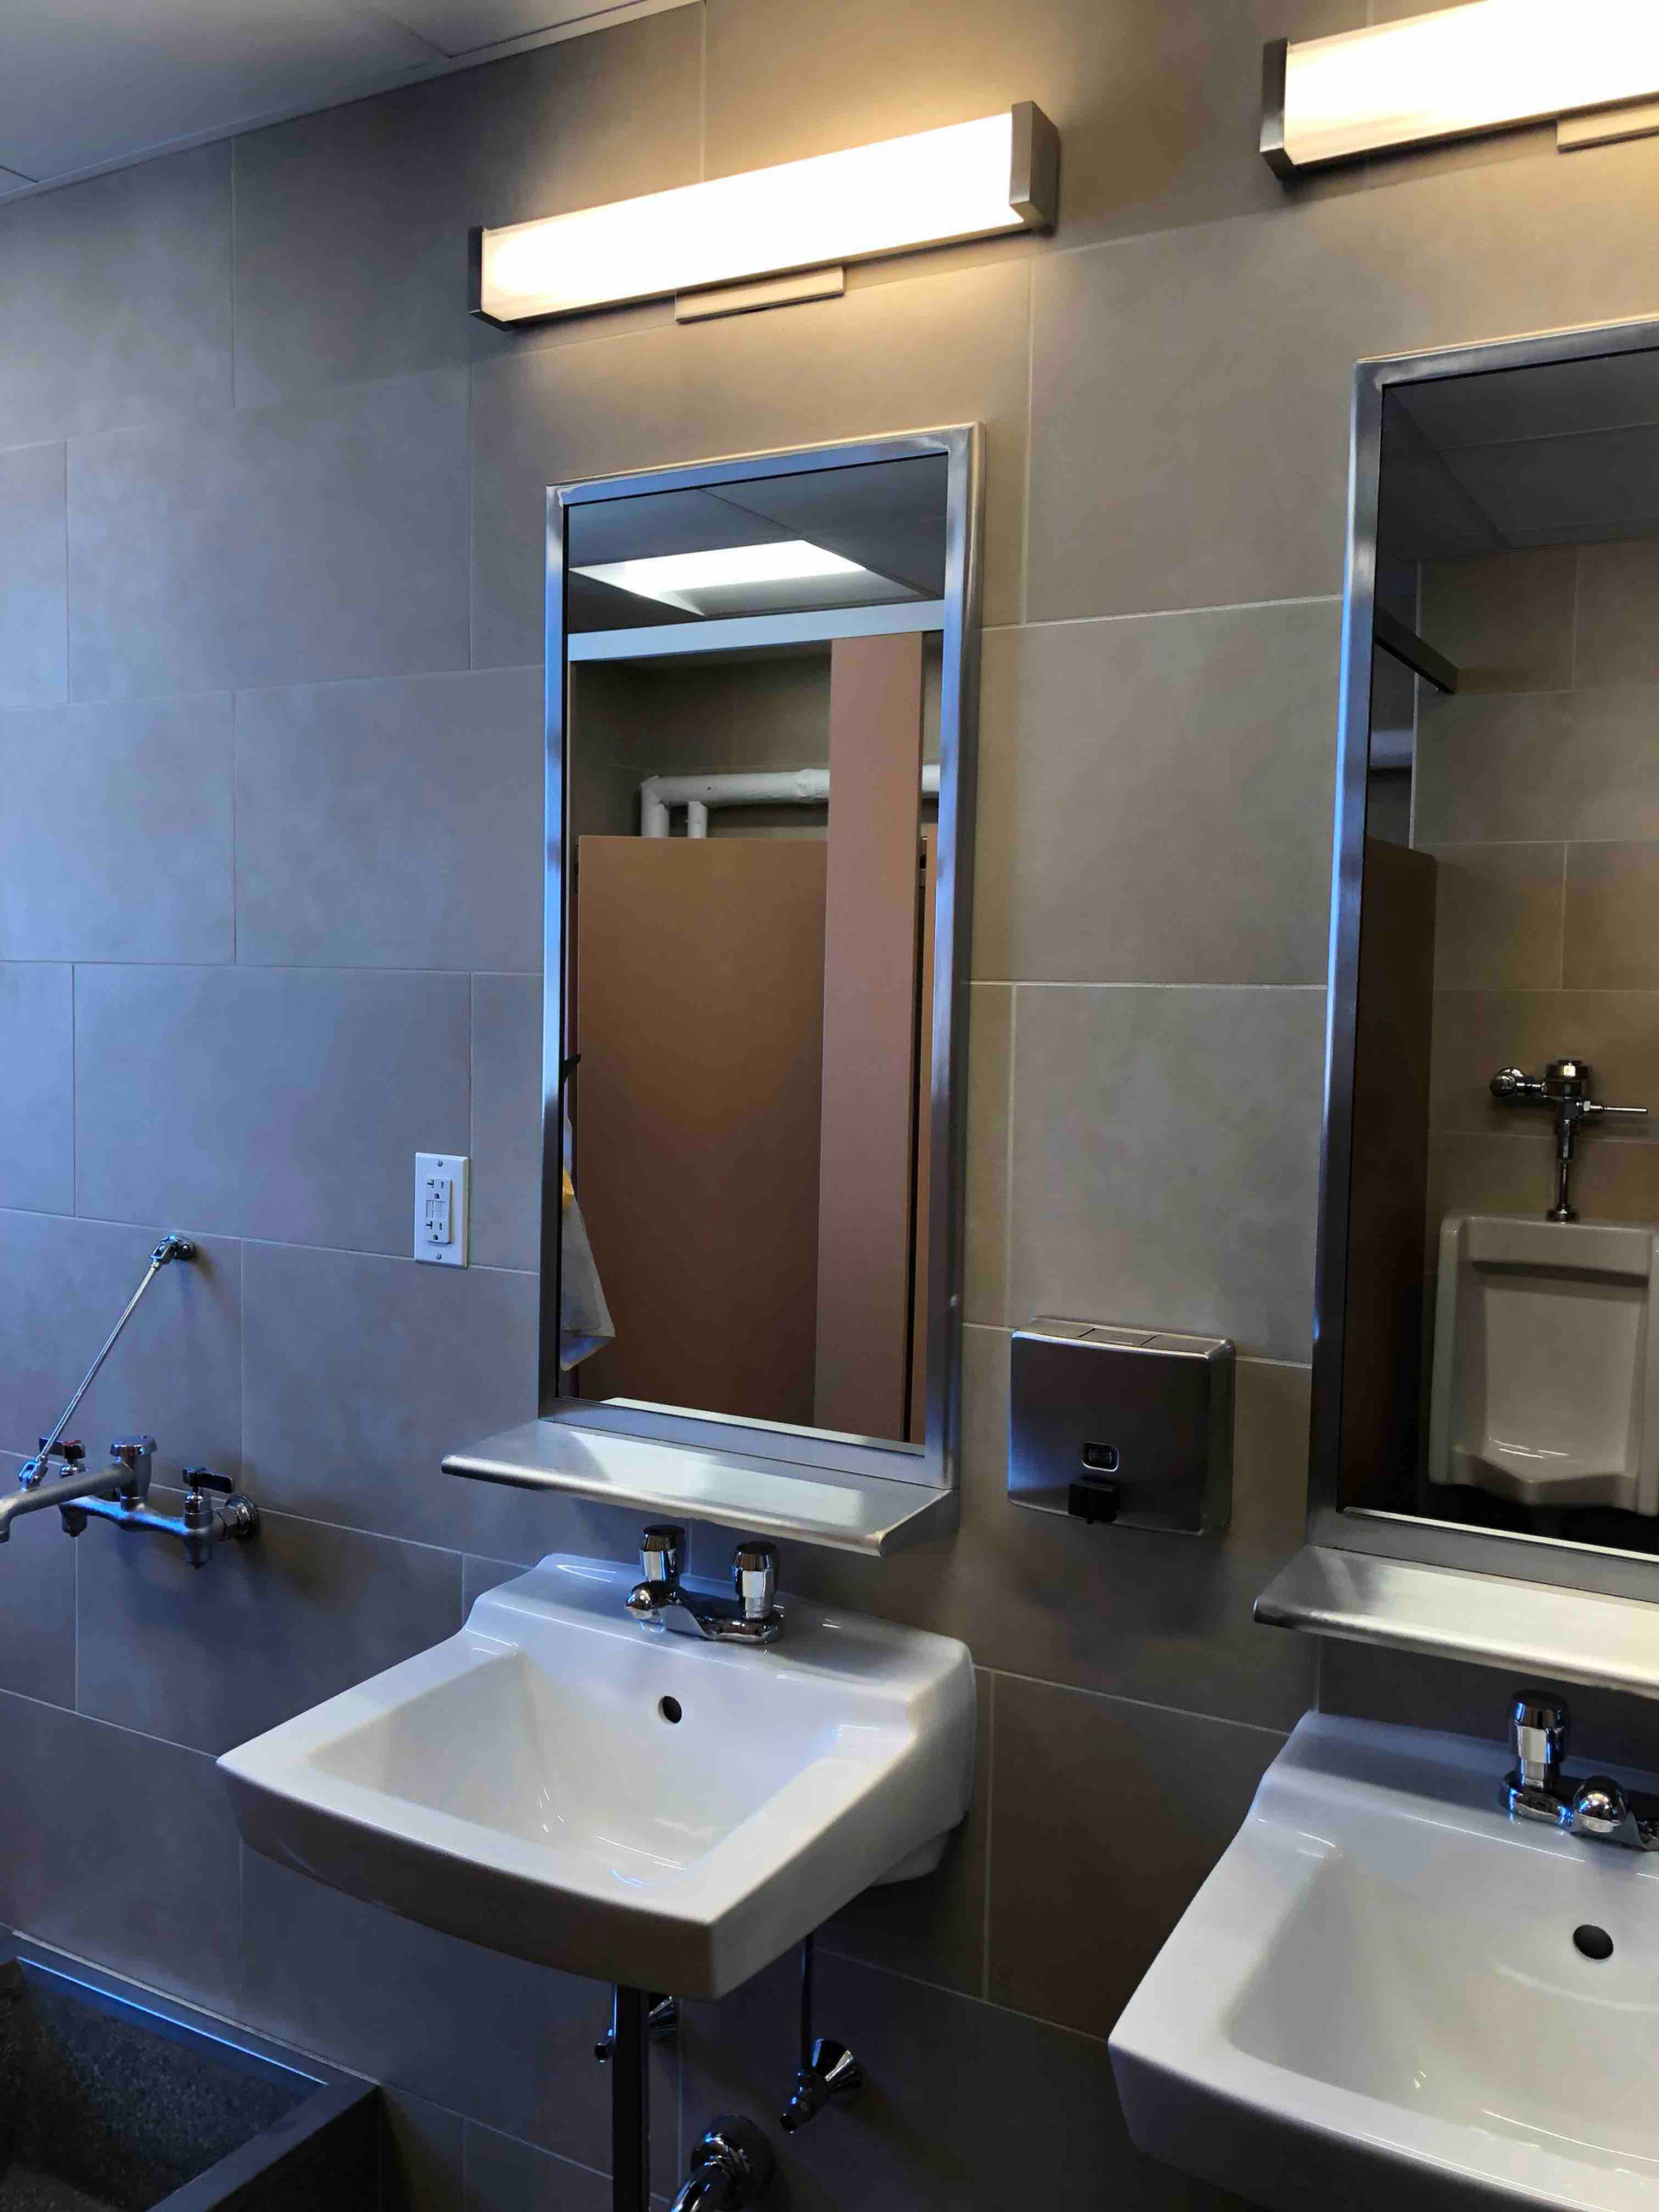 featured photo showing new mirror and sink